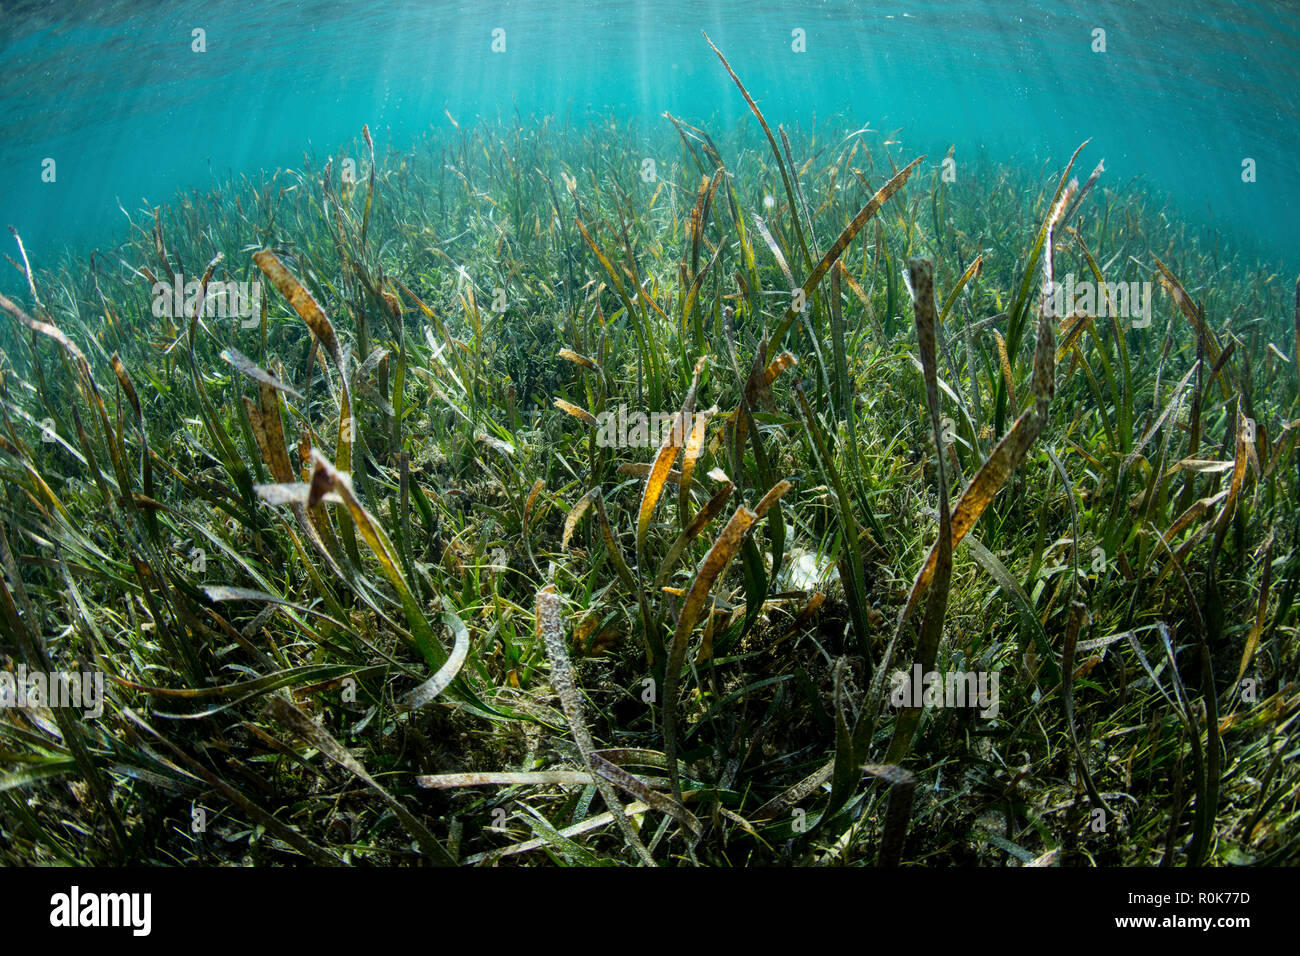 A luxurious sea grass meadow thrives in Wakatobi National Park, Indonesia. Stock Photo